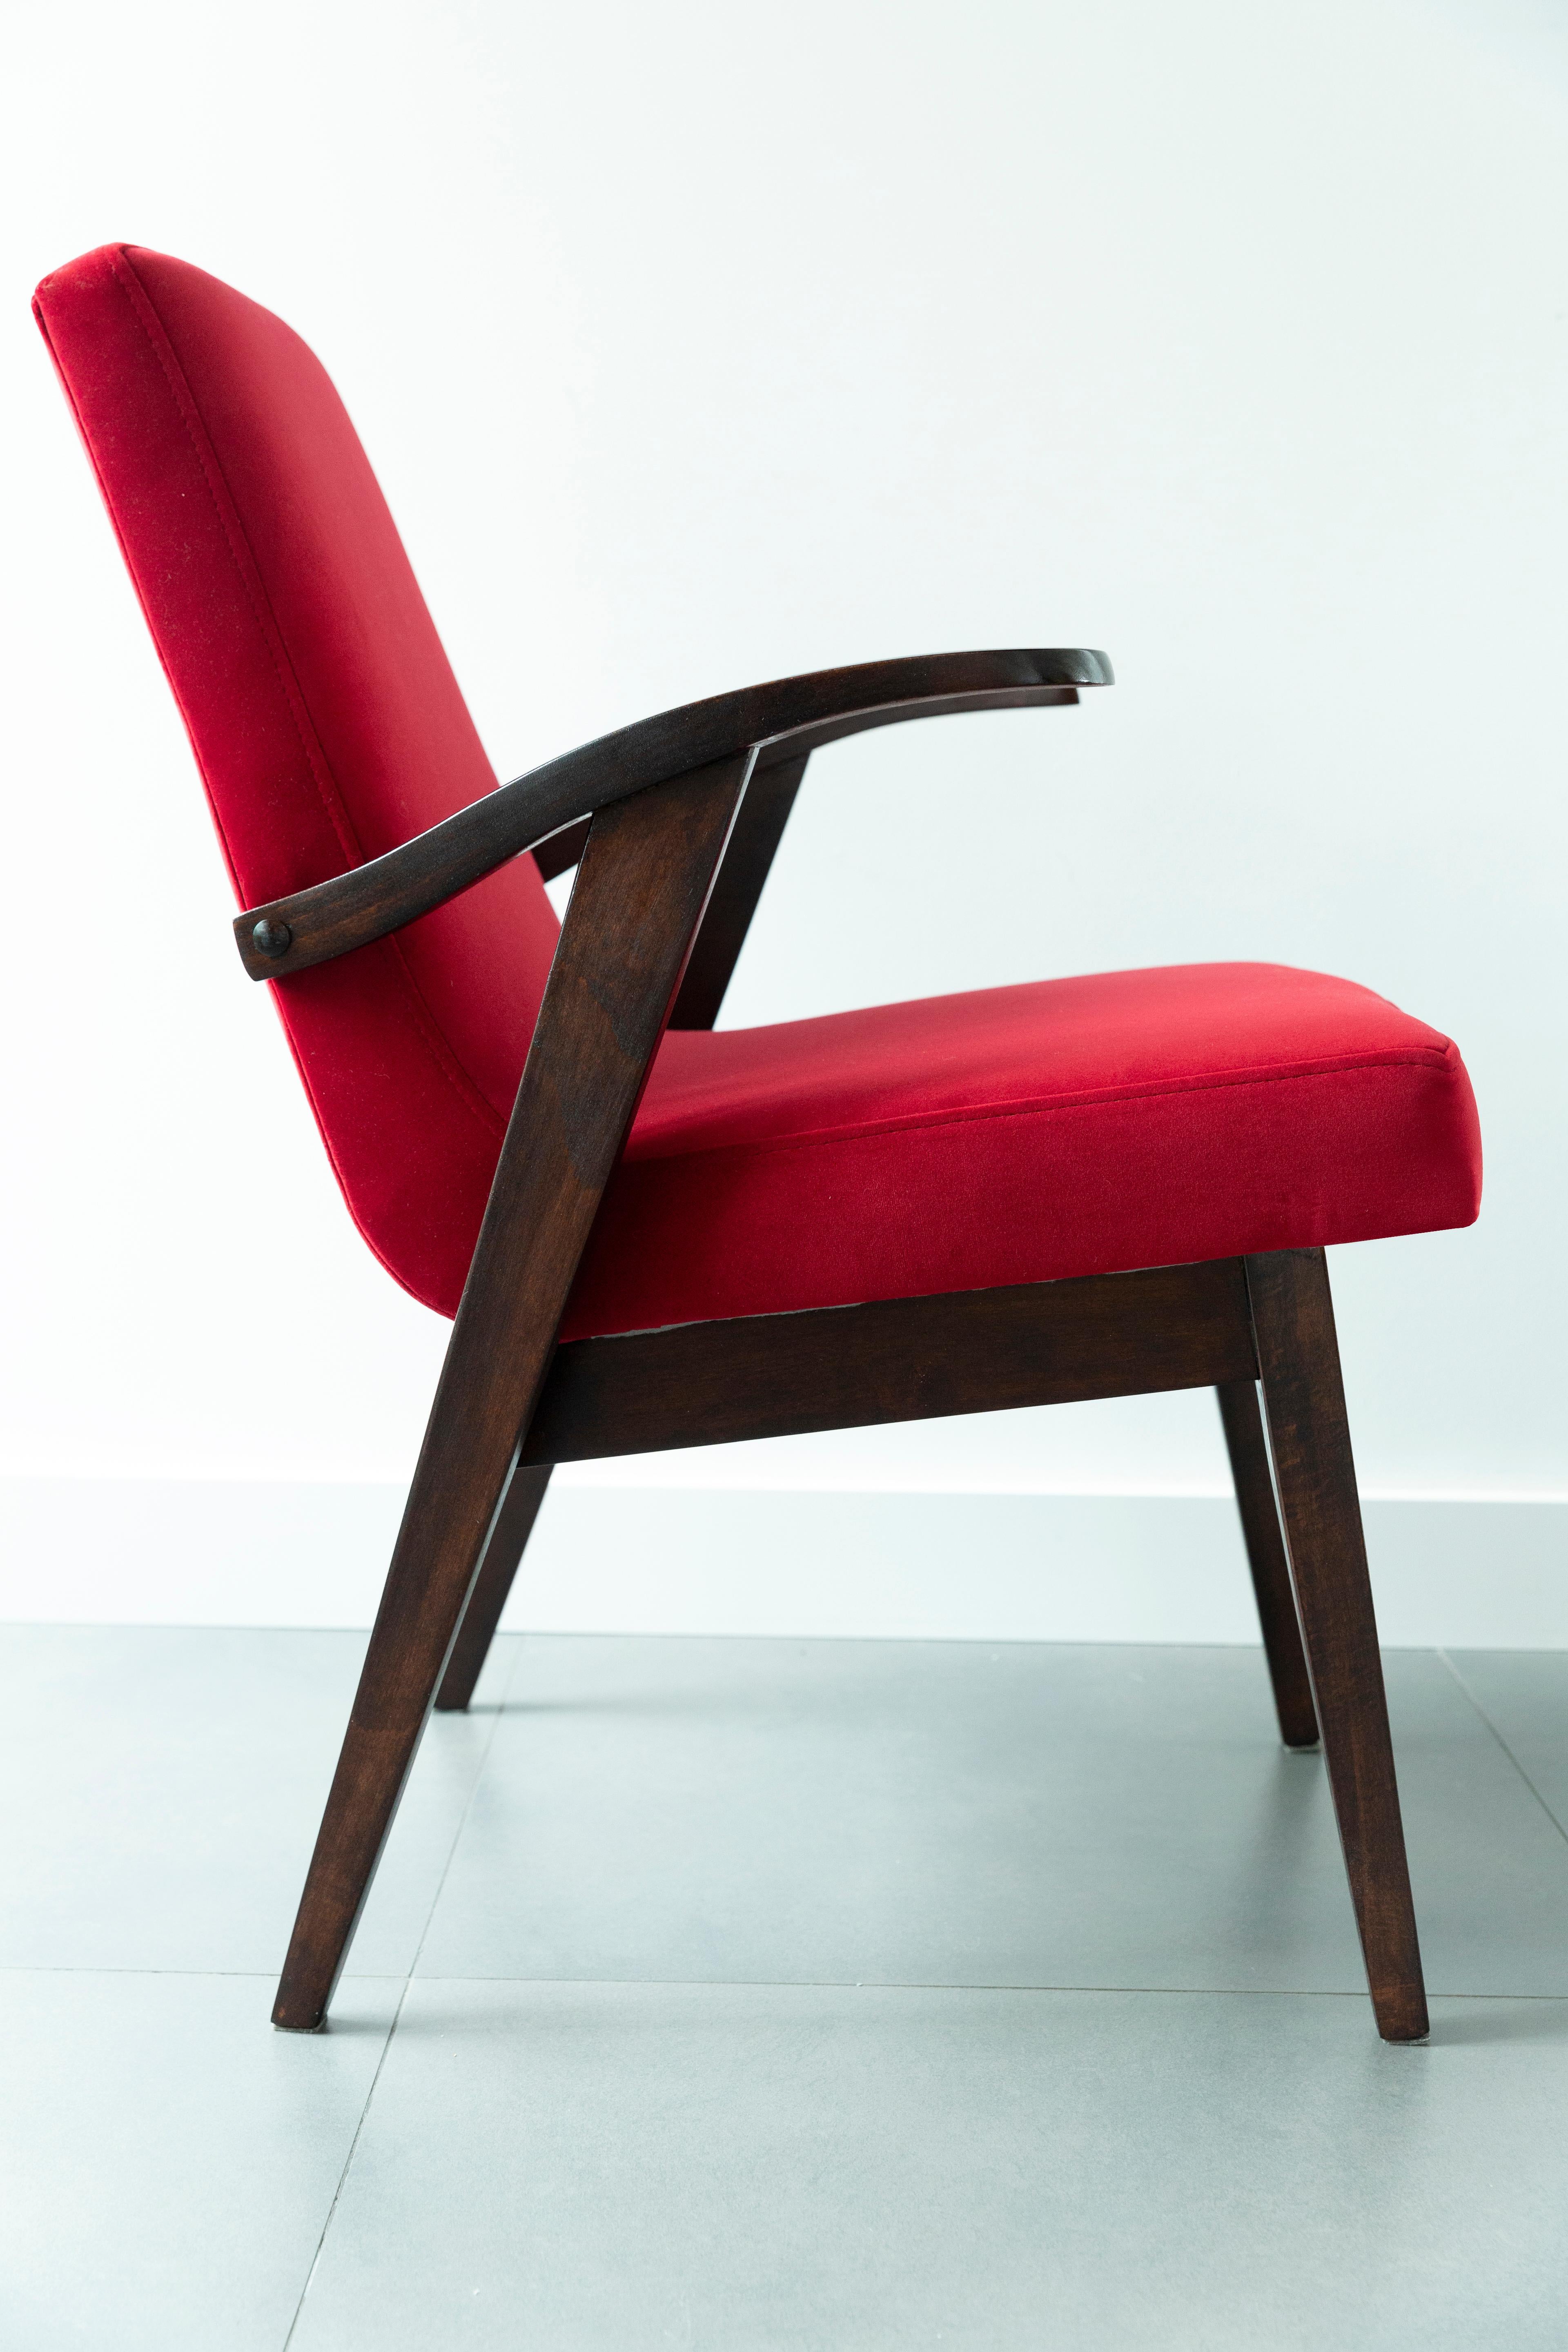 Textile 20th Century Vintage Red Armchair by Mieczyslaw Puchala, 1960s For Sale